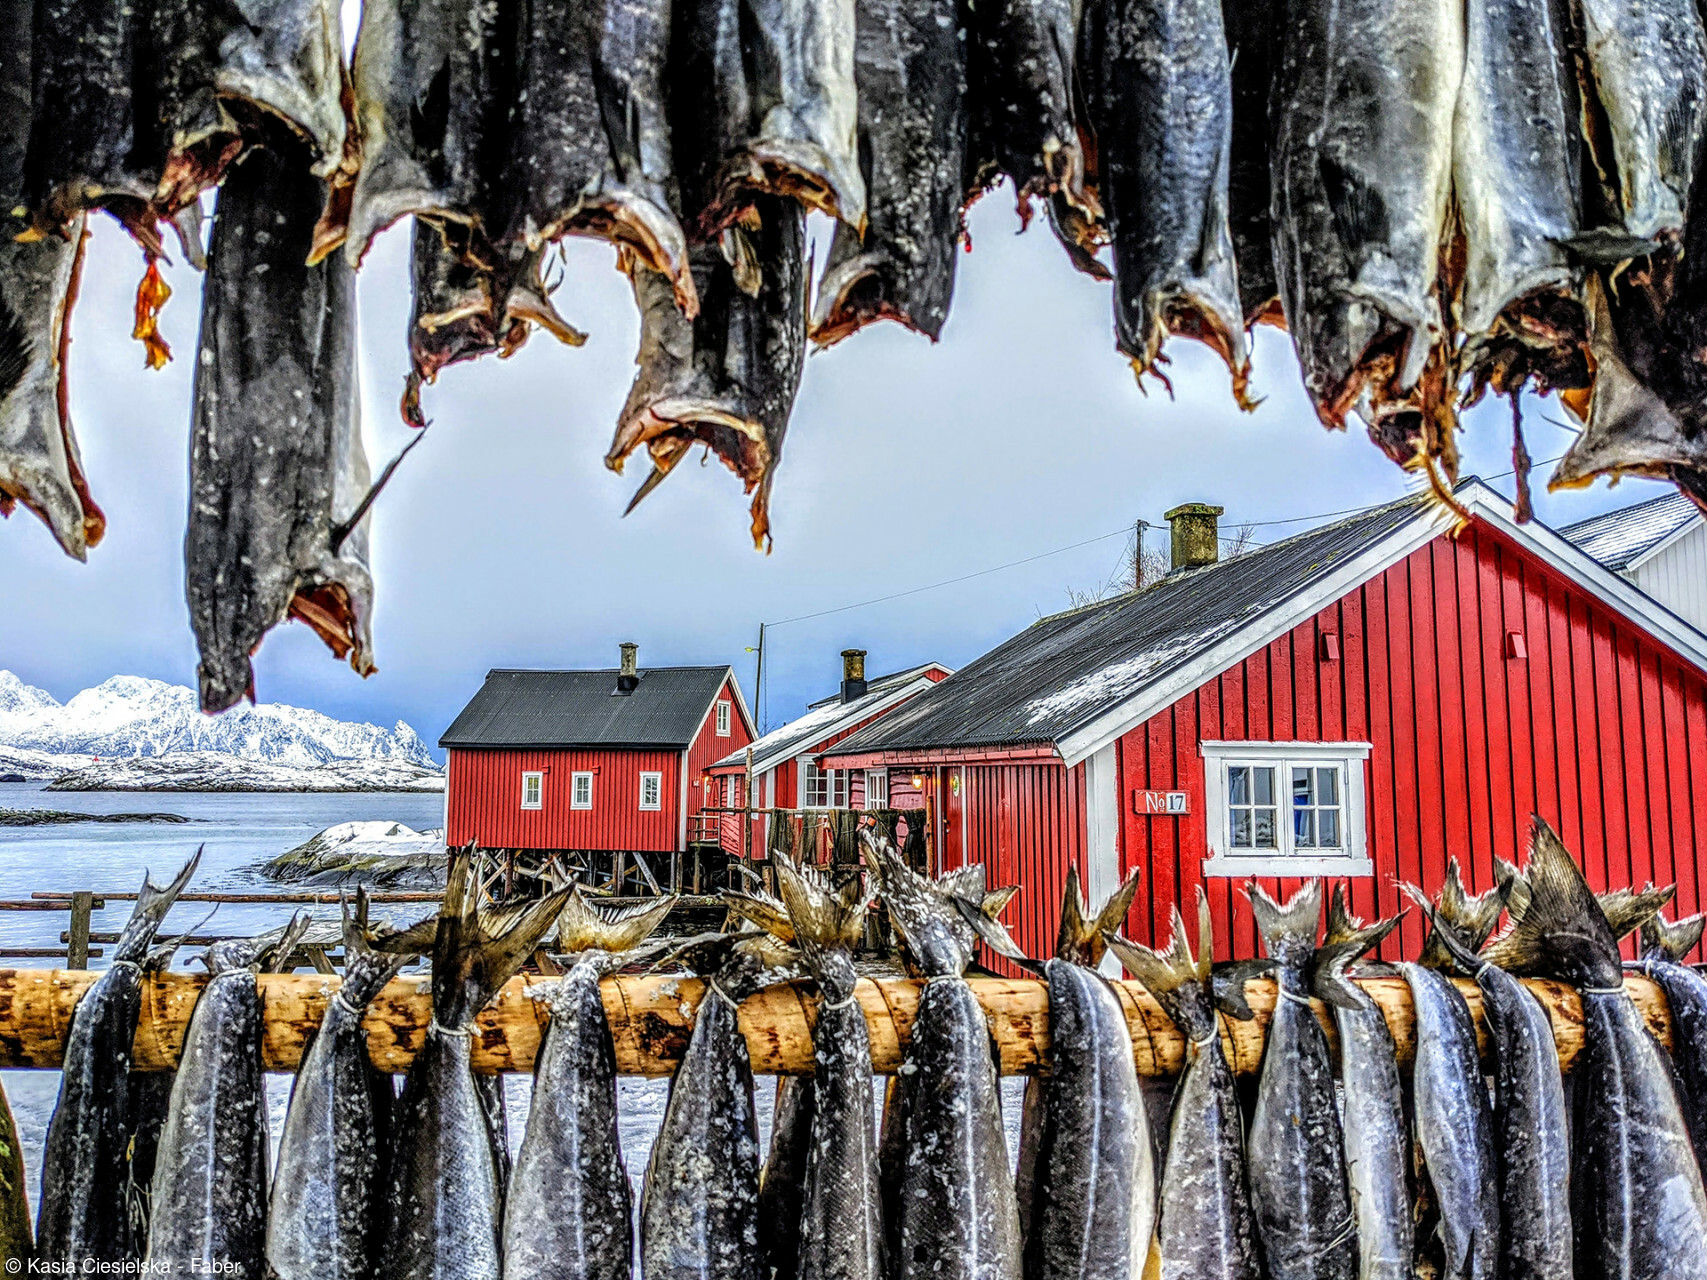 Drying Stockfish. © Kasia Ciesielska-Faber/Pink Lady® Food Photographer of the Year 2022